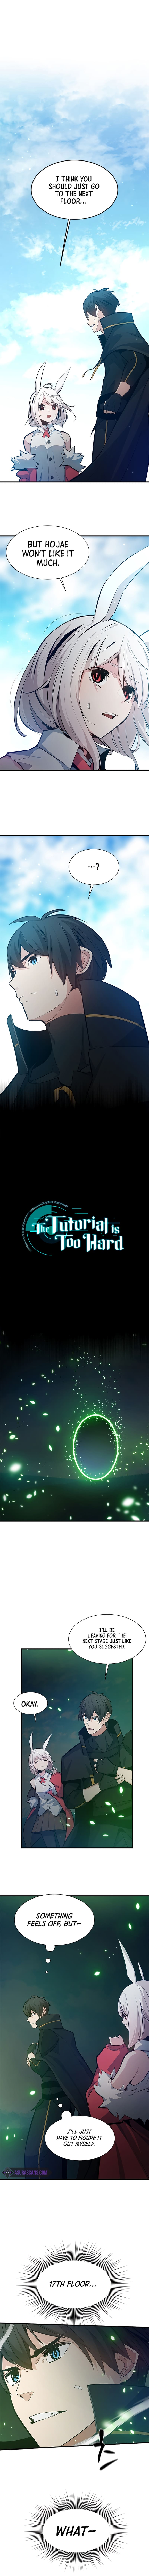 The Tutorial is Too Hard chapter 104